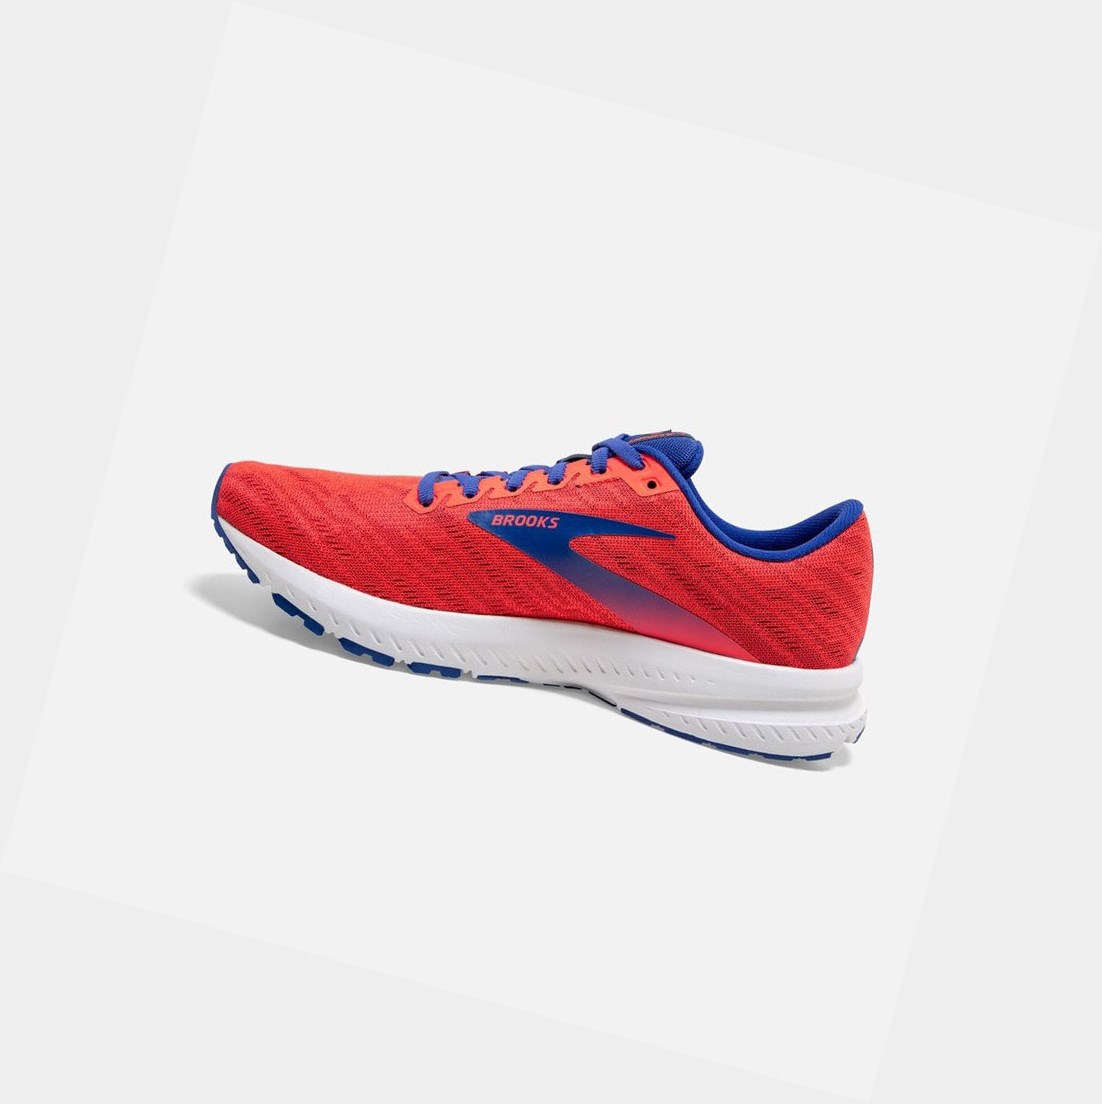 Brooks Launch 7 Women's Road Running Shoes Coral / Claret / Blue | FRPG-08314